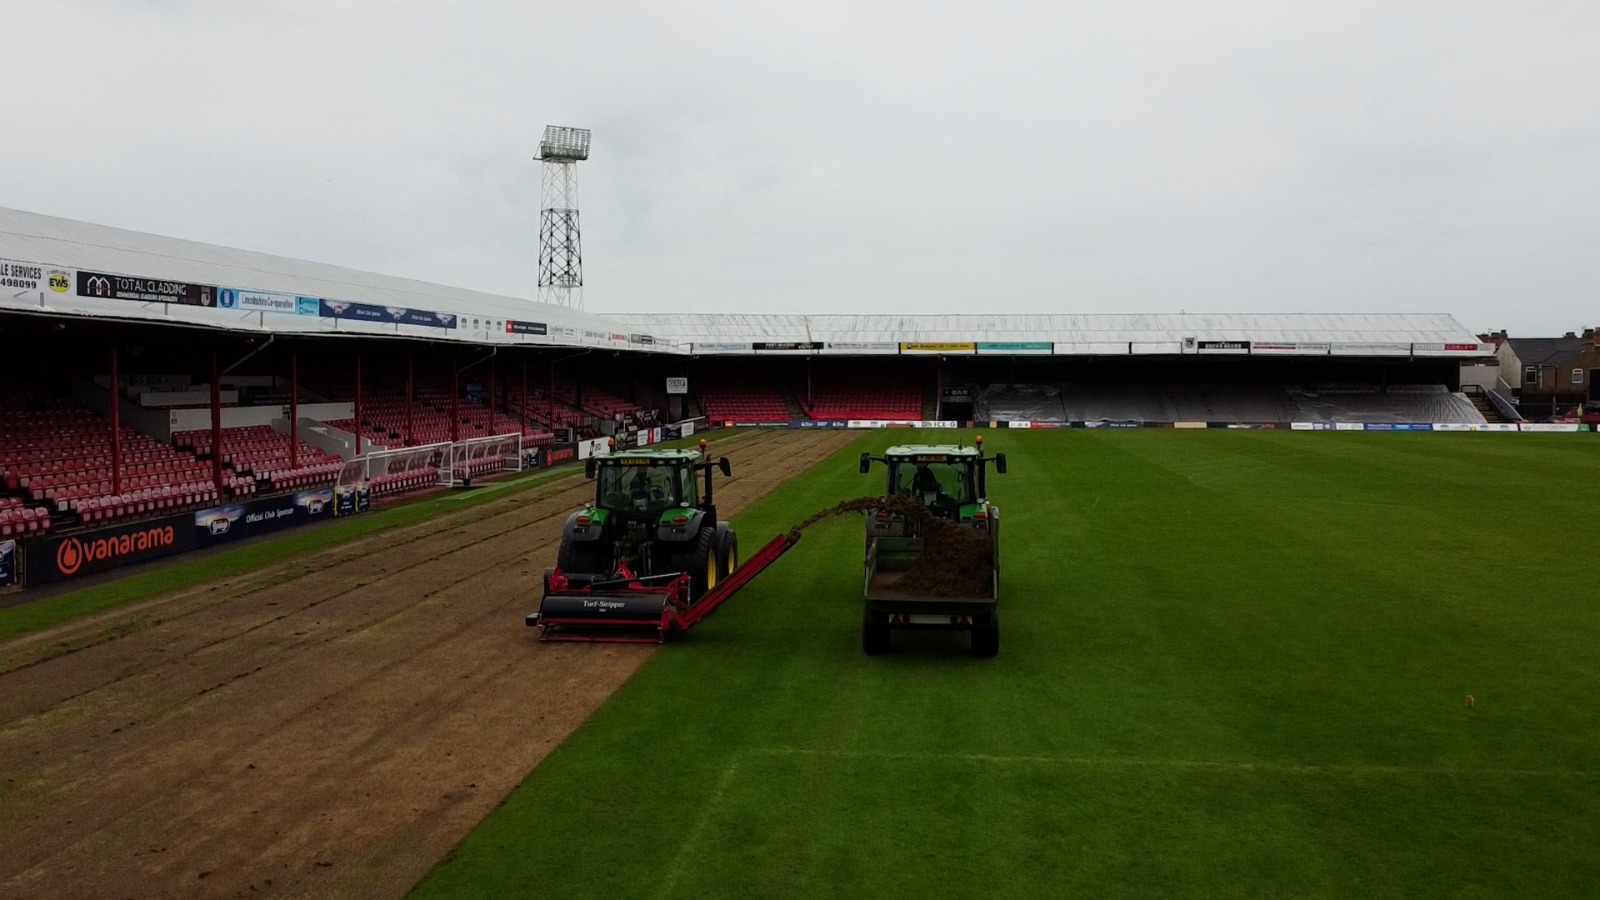 Blundell park getting worked on